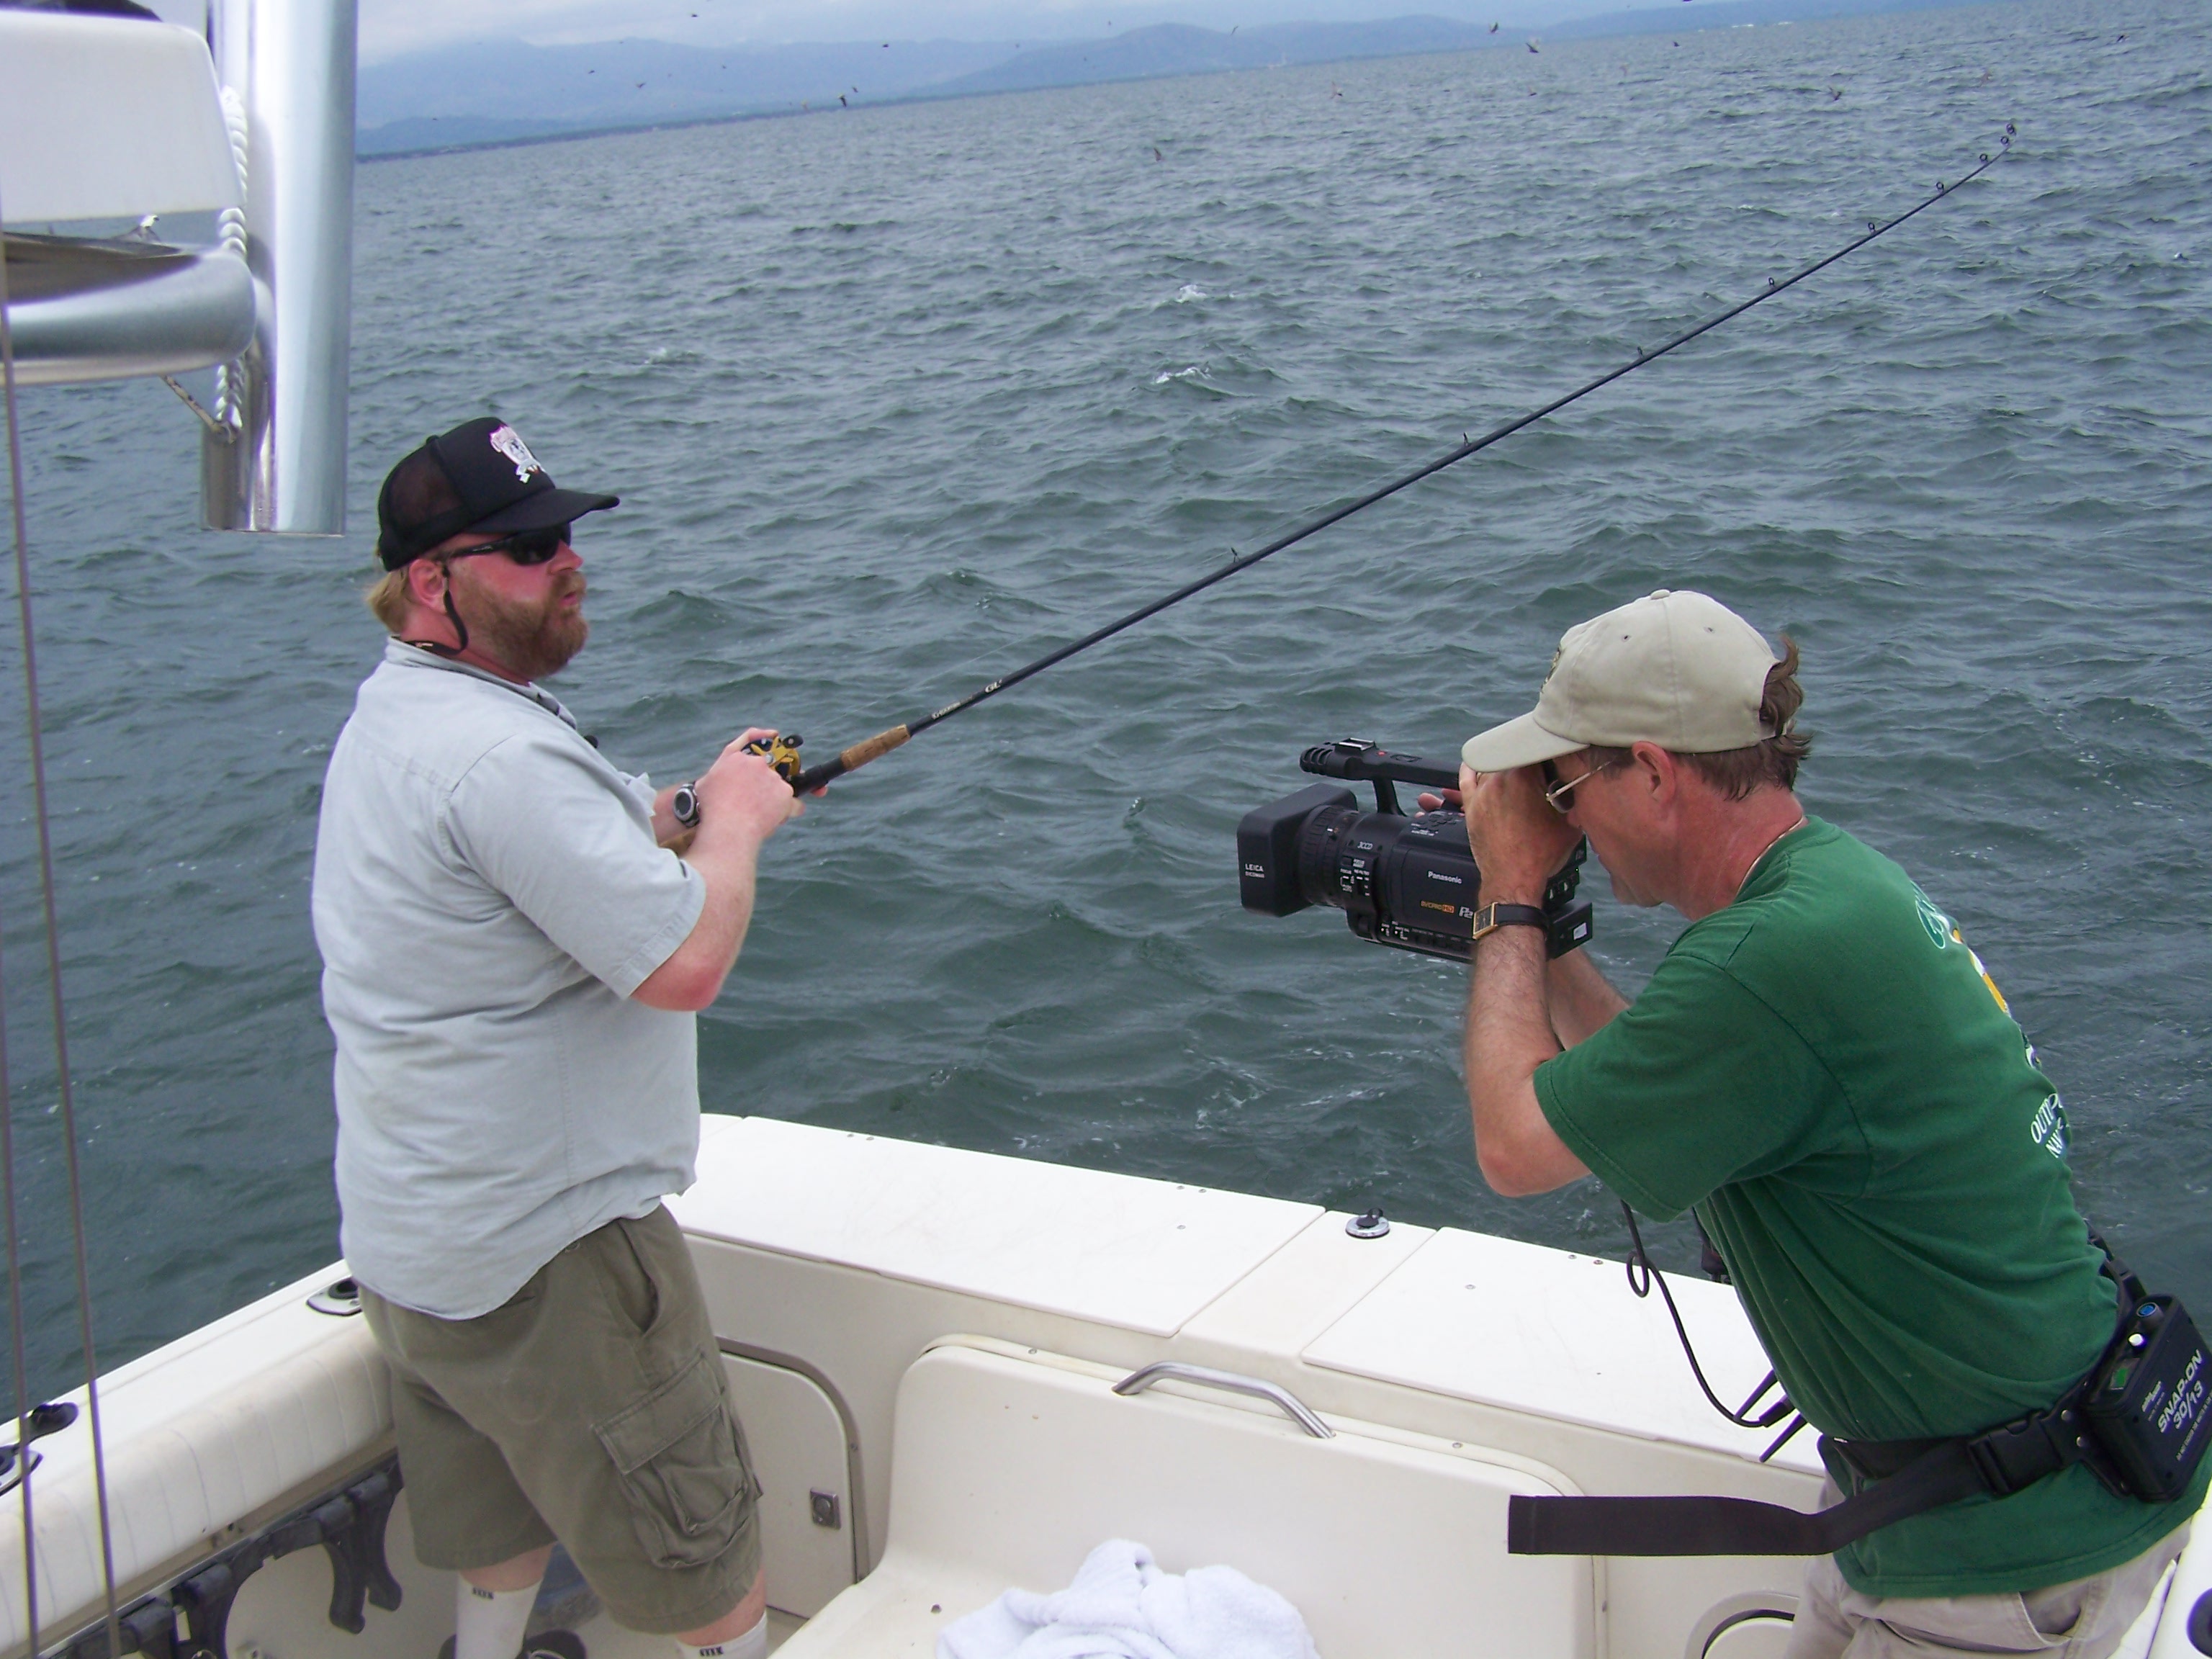 Buck McNeely fishing off the Pacific coast in Costa Rica.